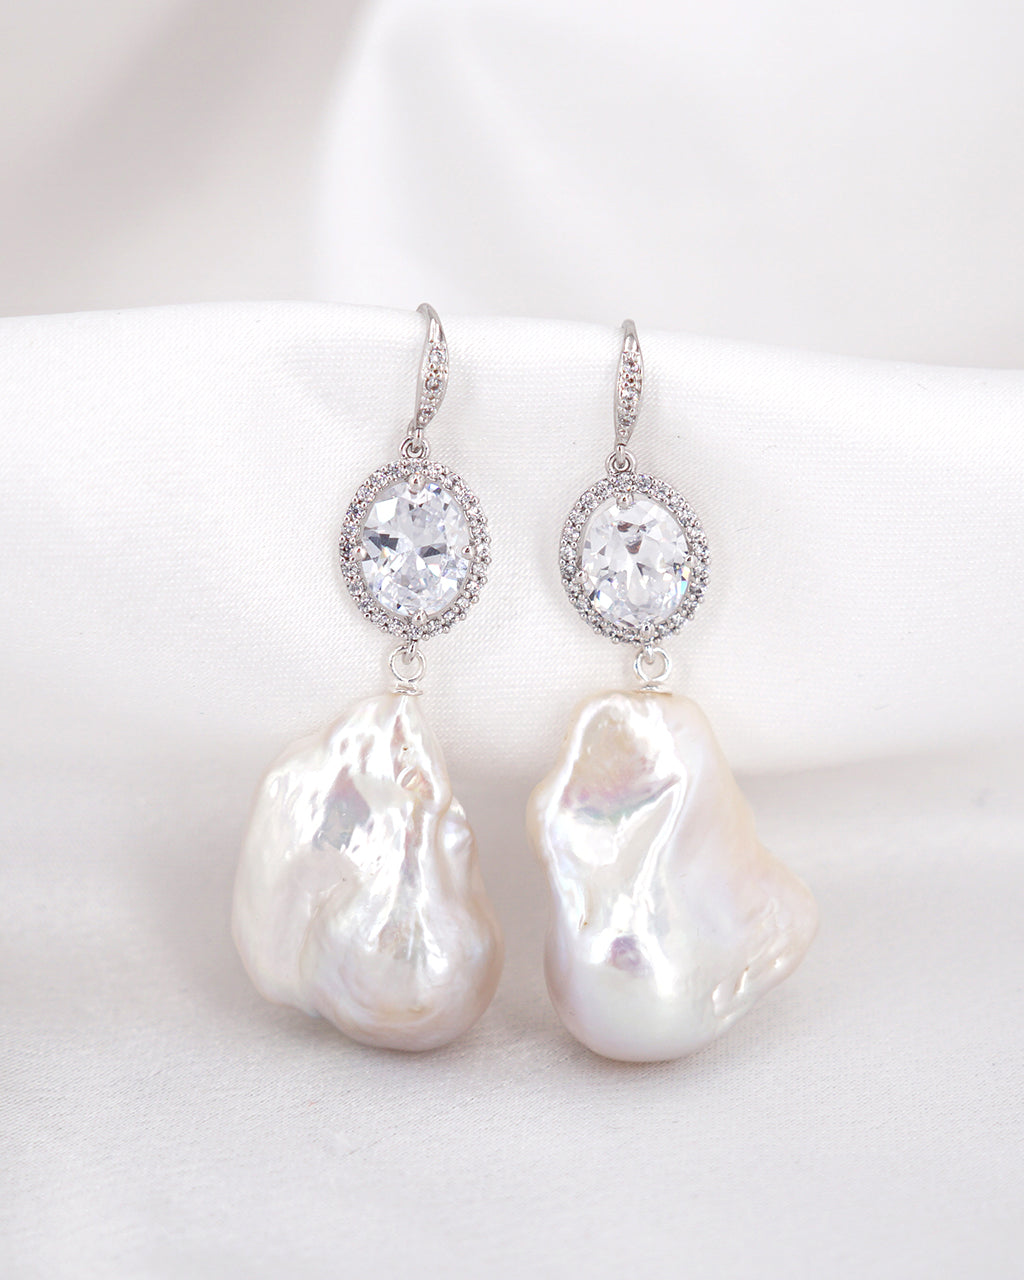 Statement Baroque Pearl Oval Chandelier Earrings - White Flameball - Wedding Bridal Jewelry for Brides and Bridesmaids | Singapore